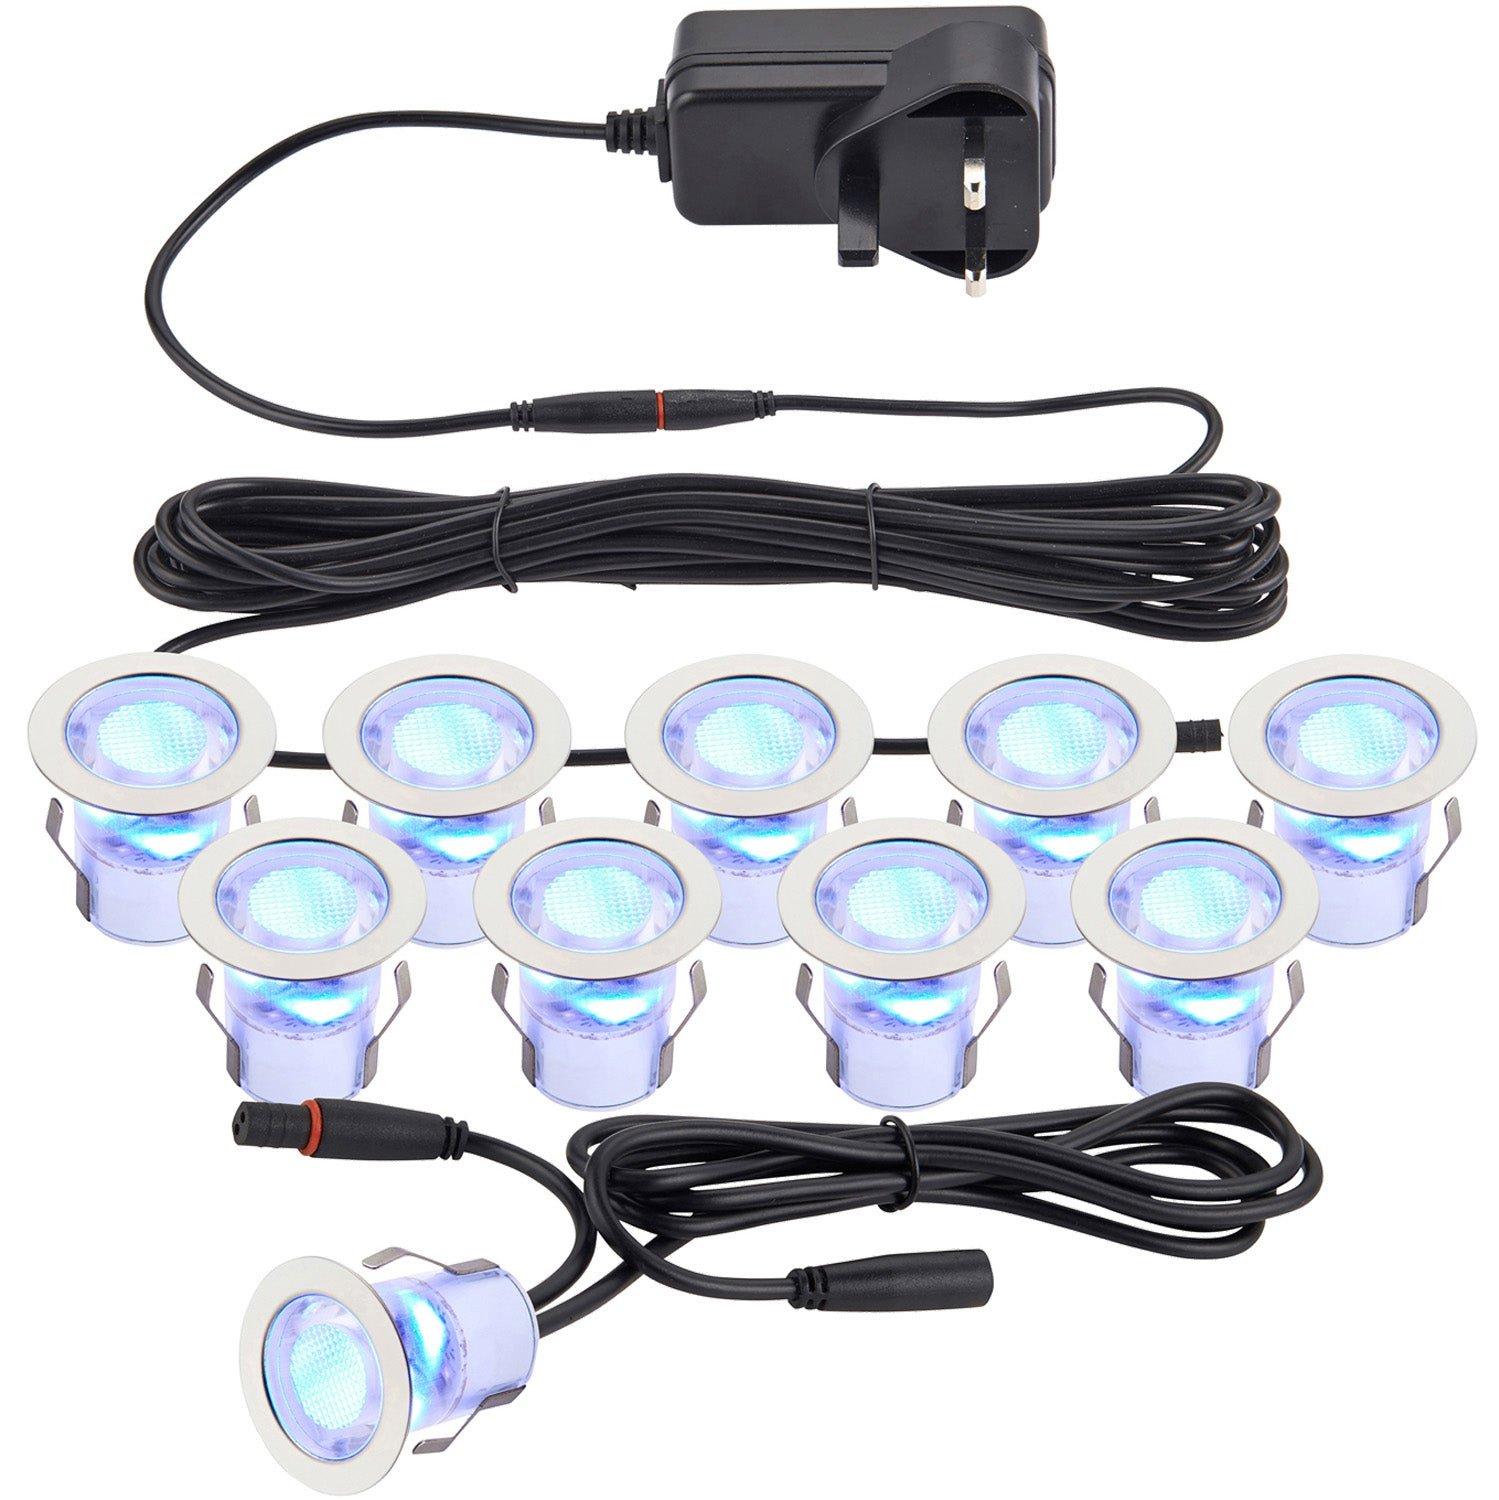 Recessed IP44 Decking Guide Light Kit - 10 x Blue Light LED - Stainless Steel